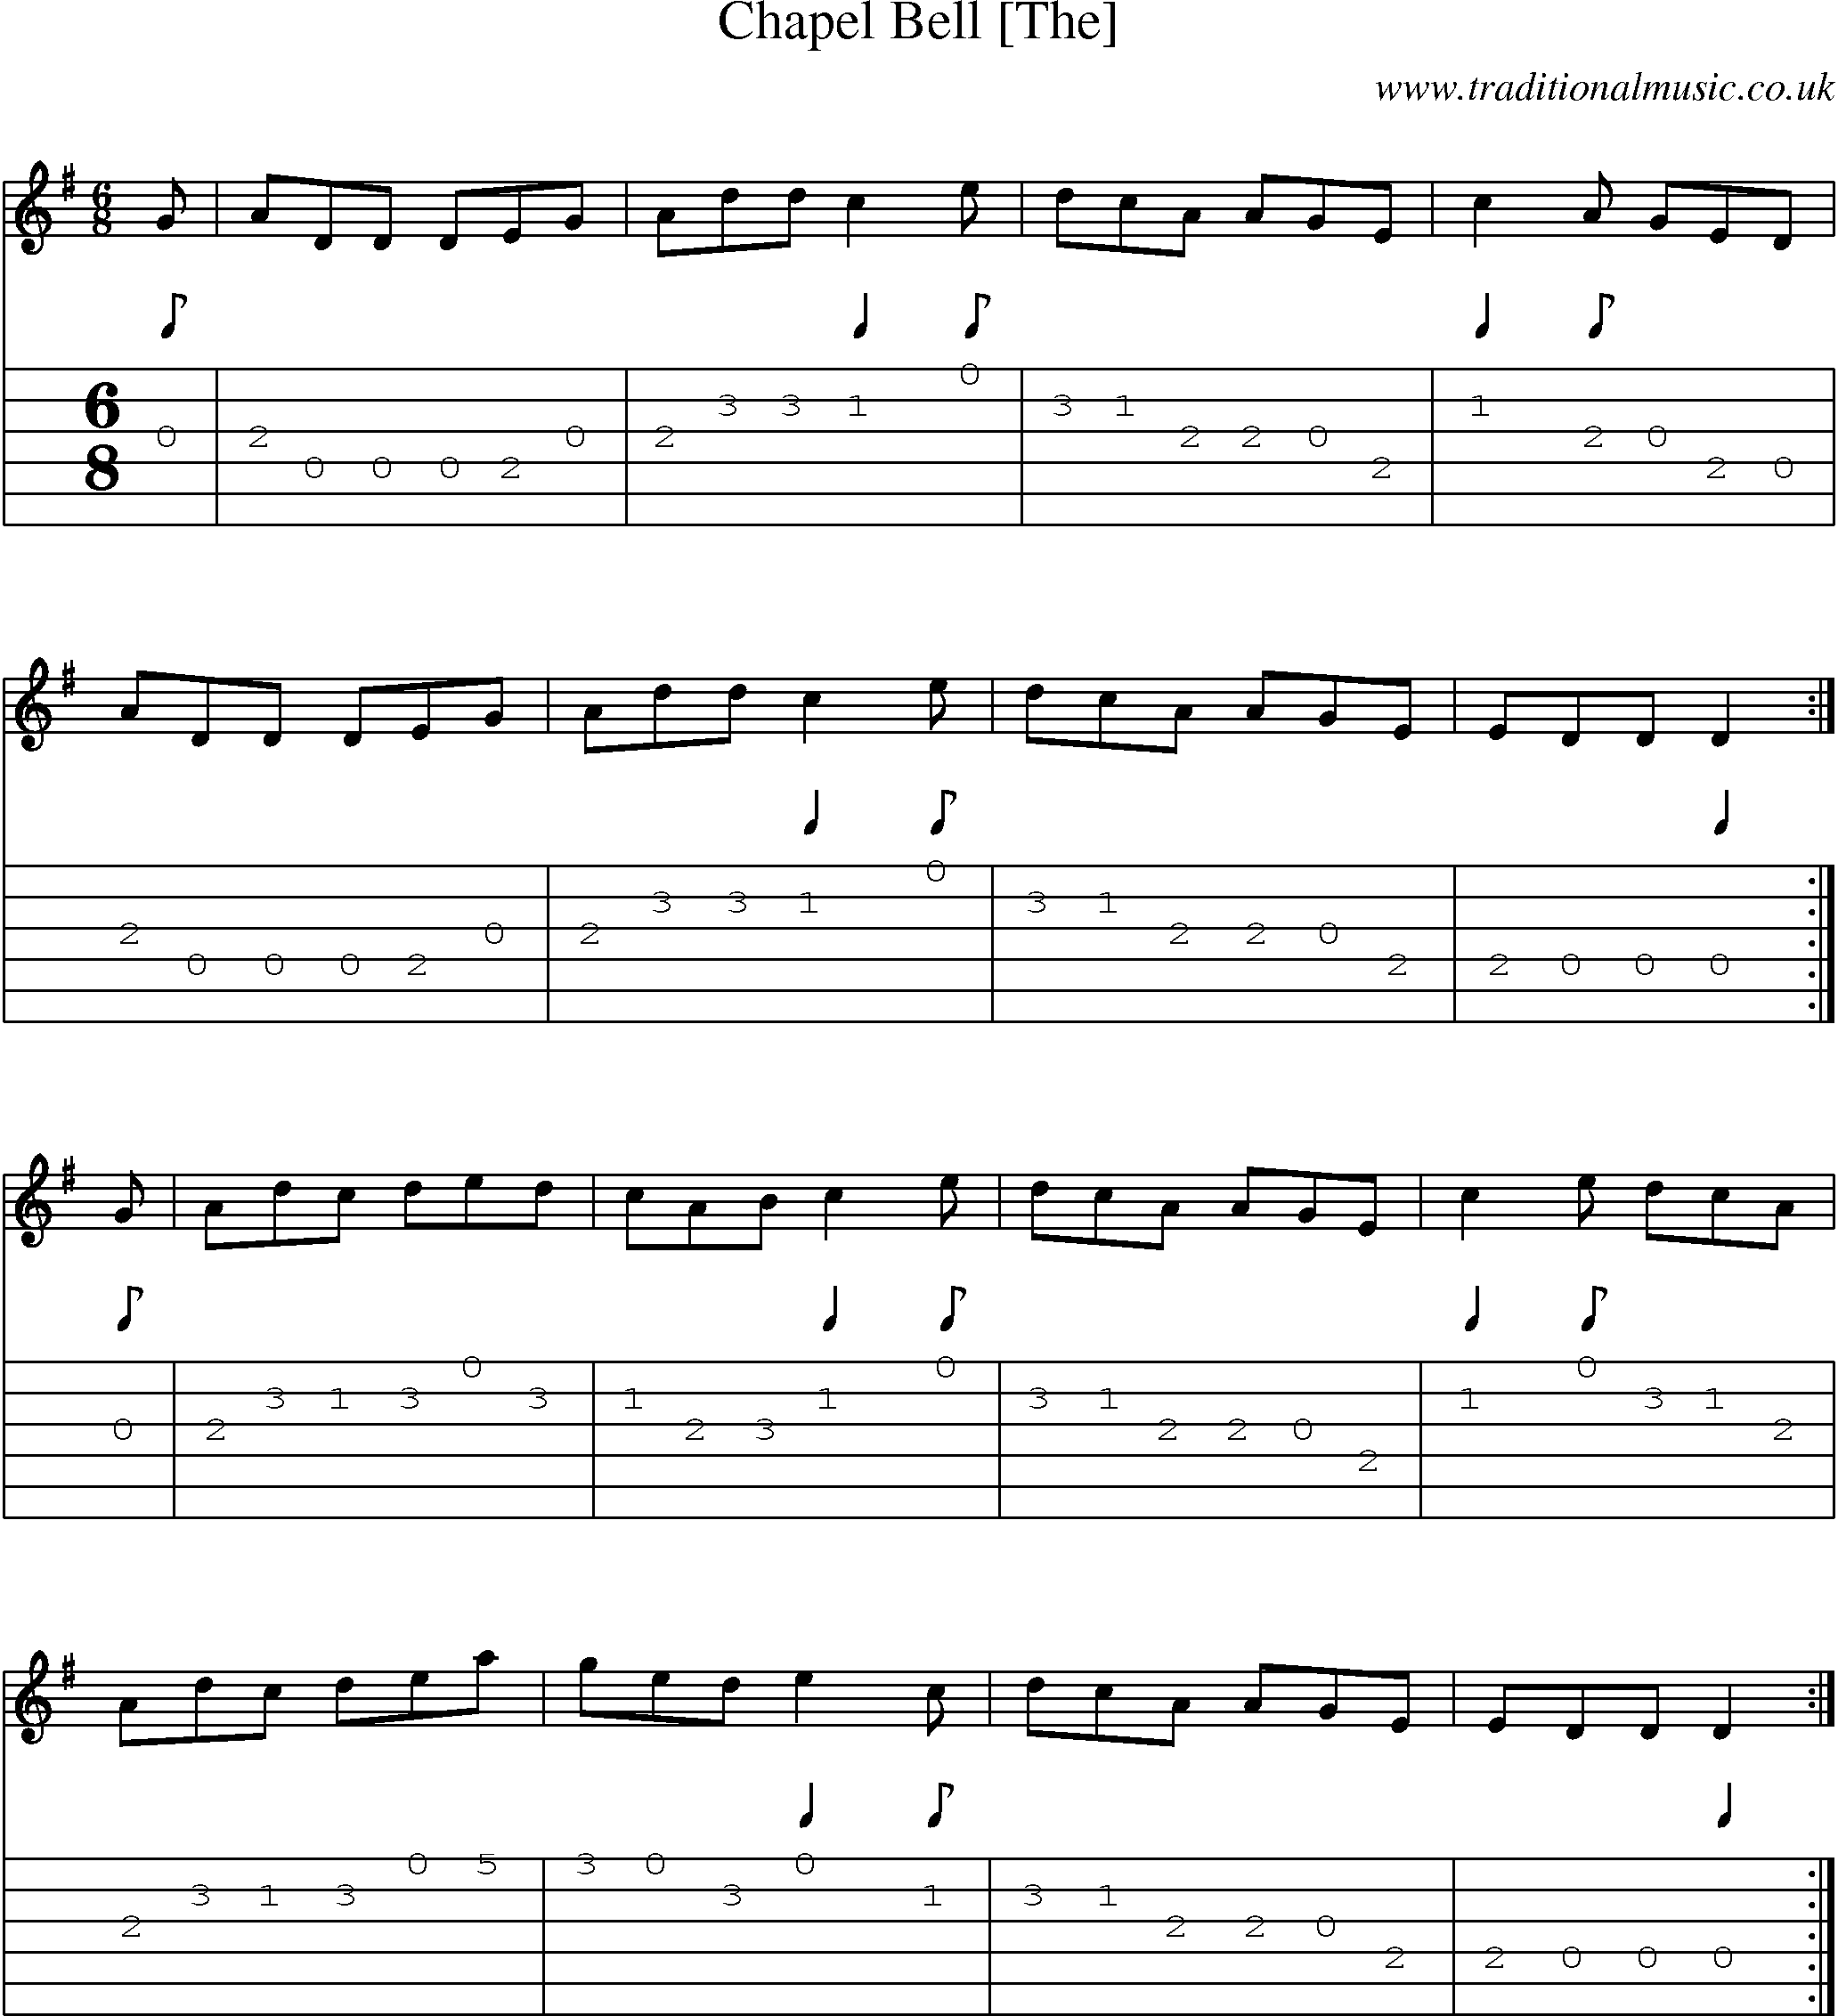 Music Score and Guitar Tabs for Chapel Bell